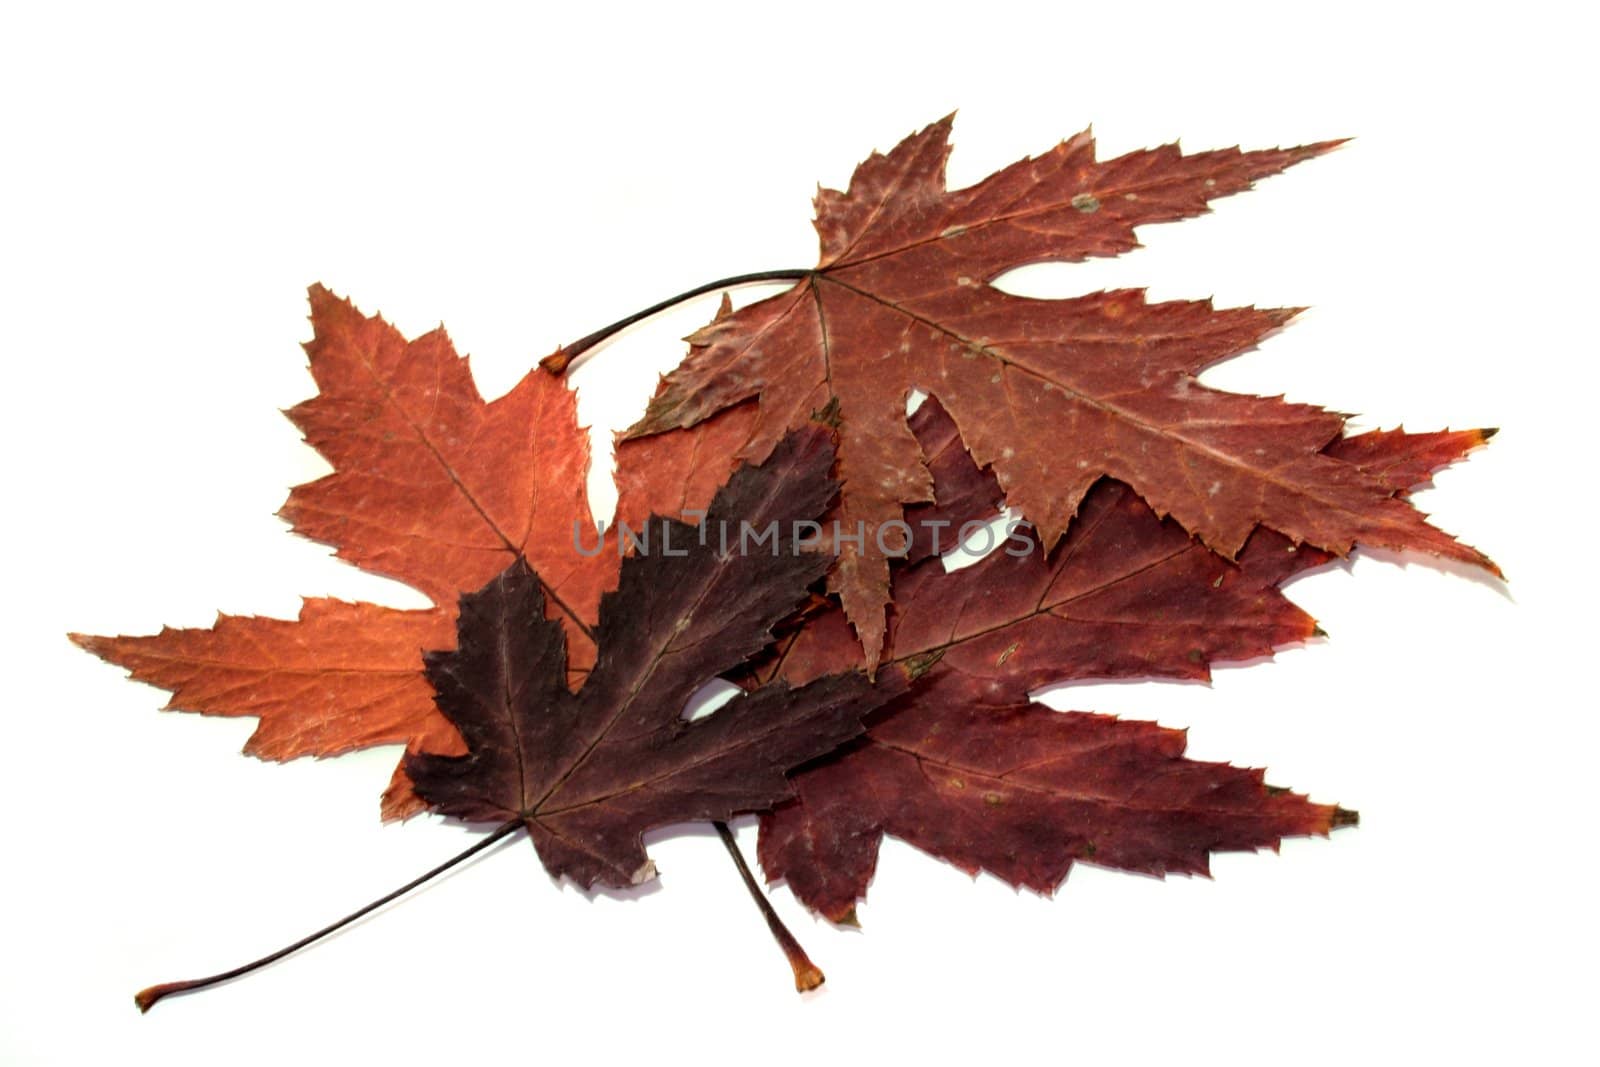 red-brown autumn leaves on a white background